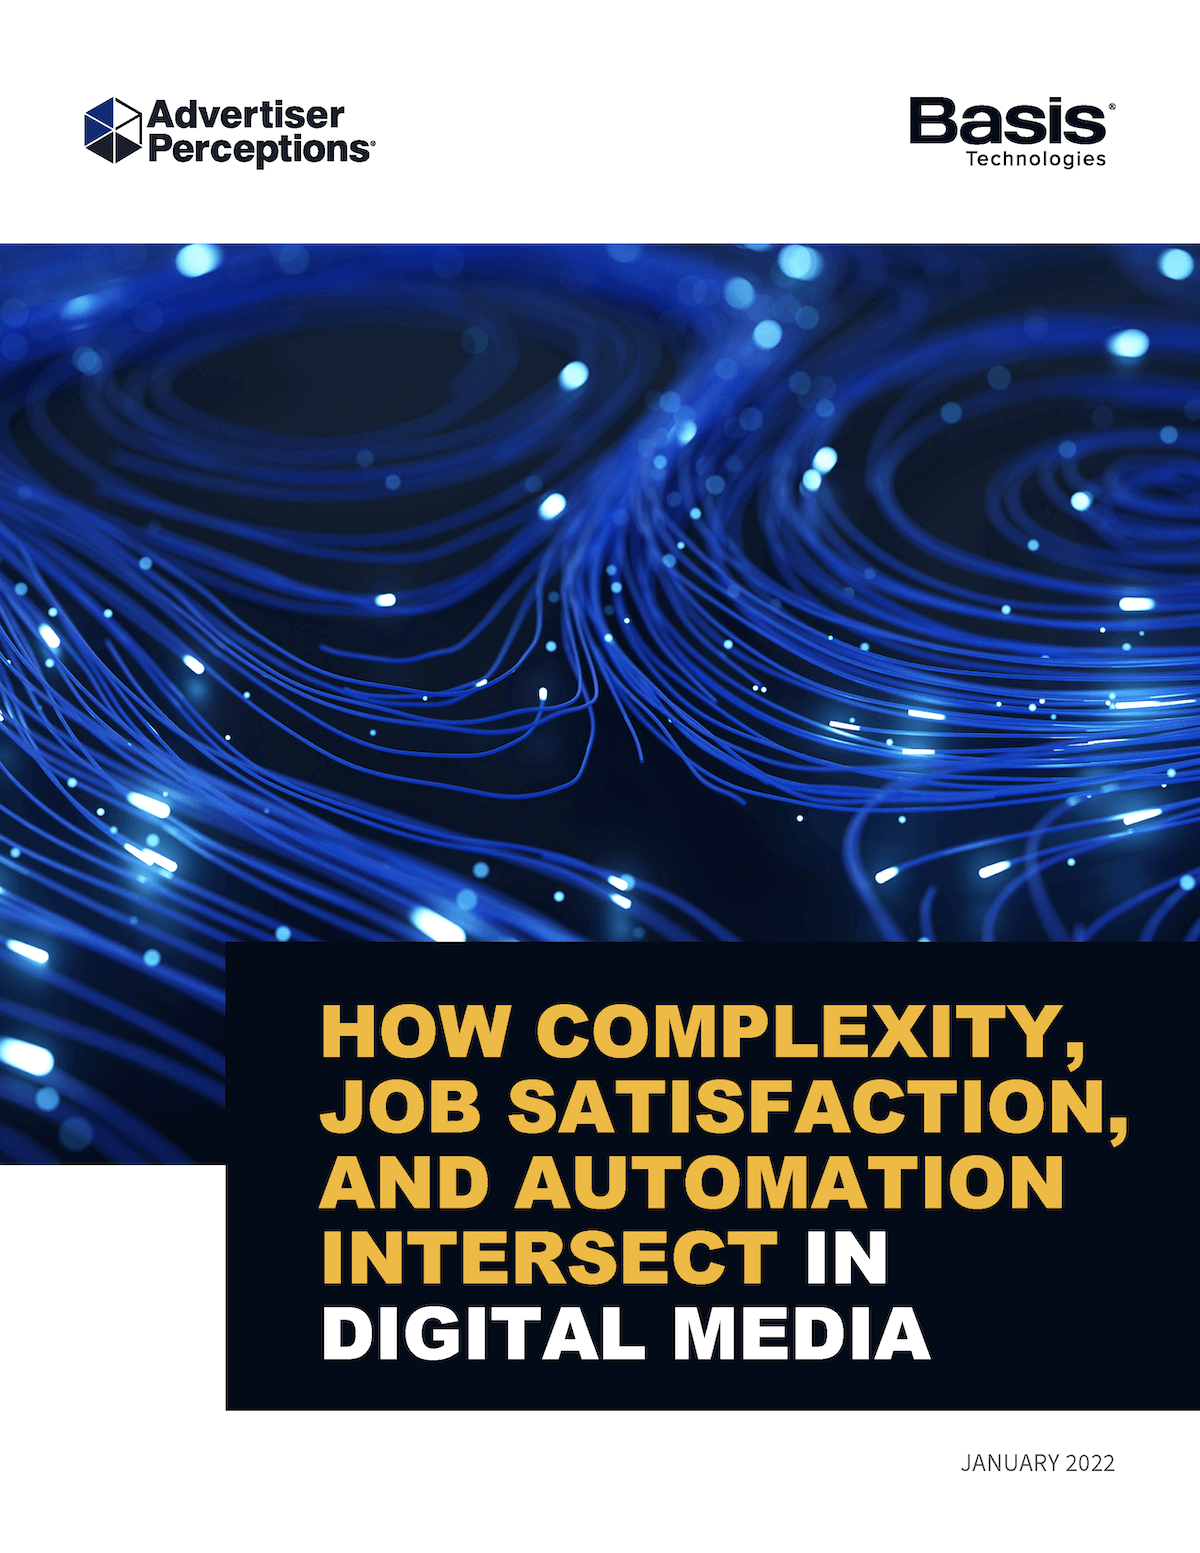 Job satisfaction guide cover